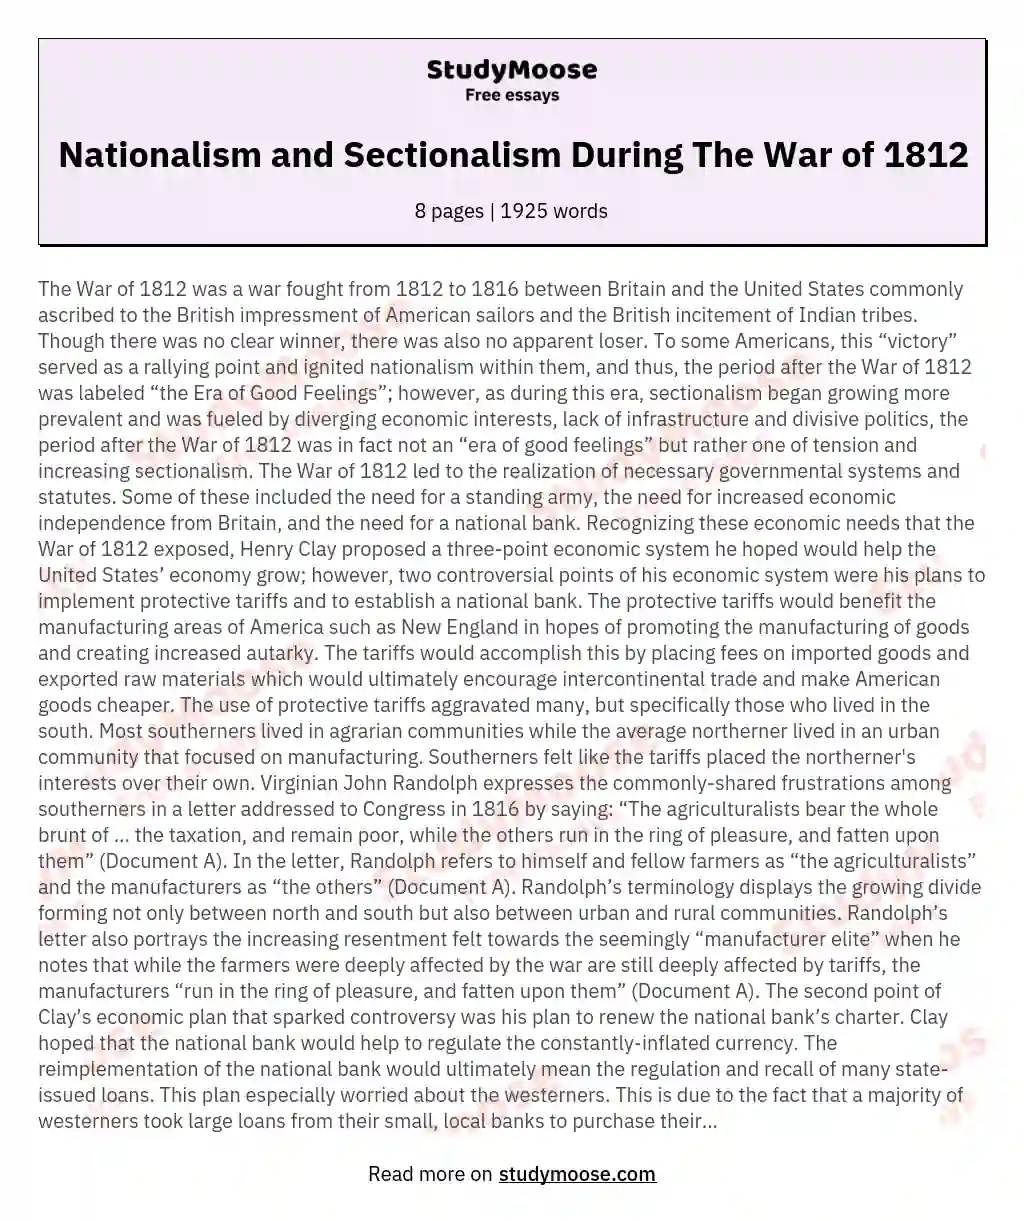 Nationalism and Sectionalism During The War of 1812 essay